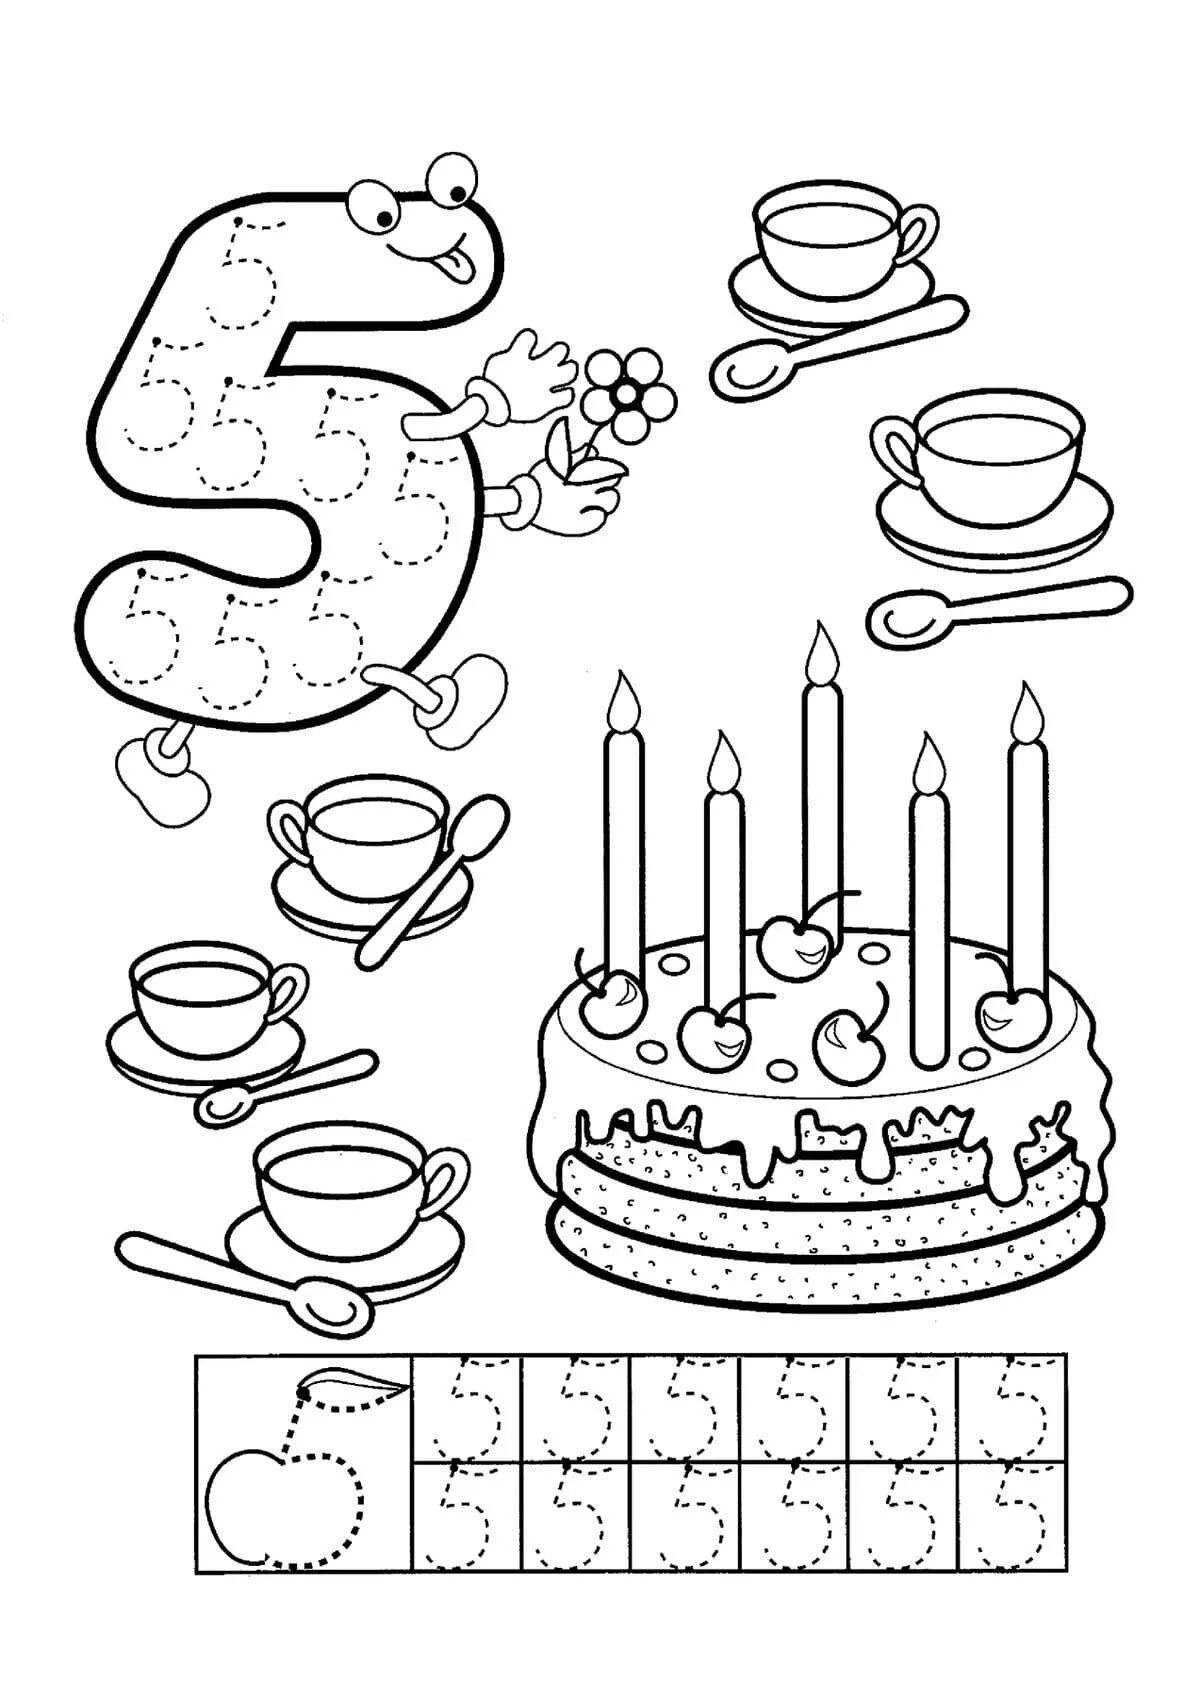 Color-magical coloring page learning numbers